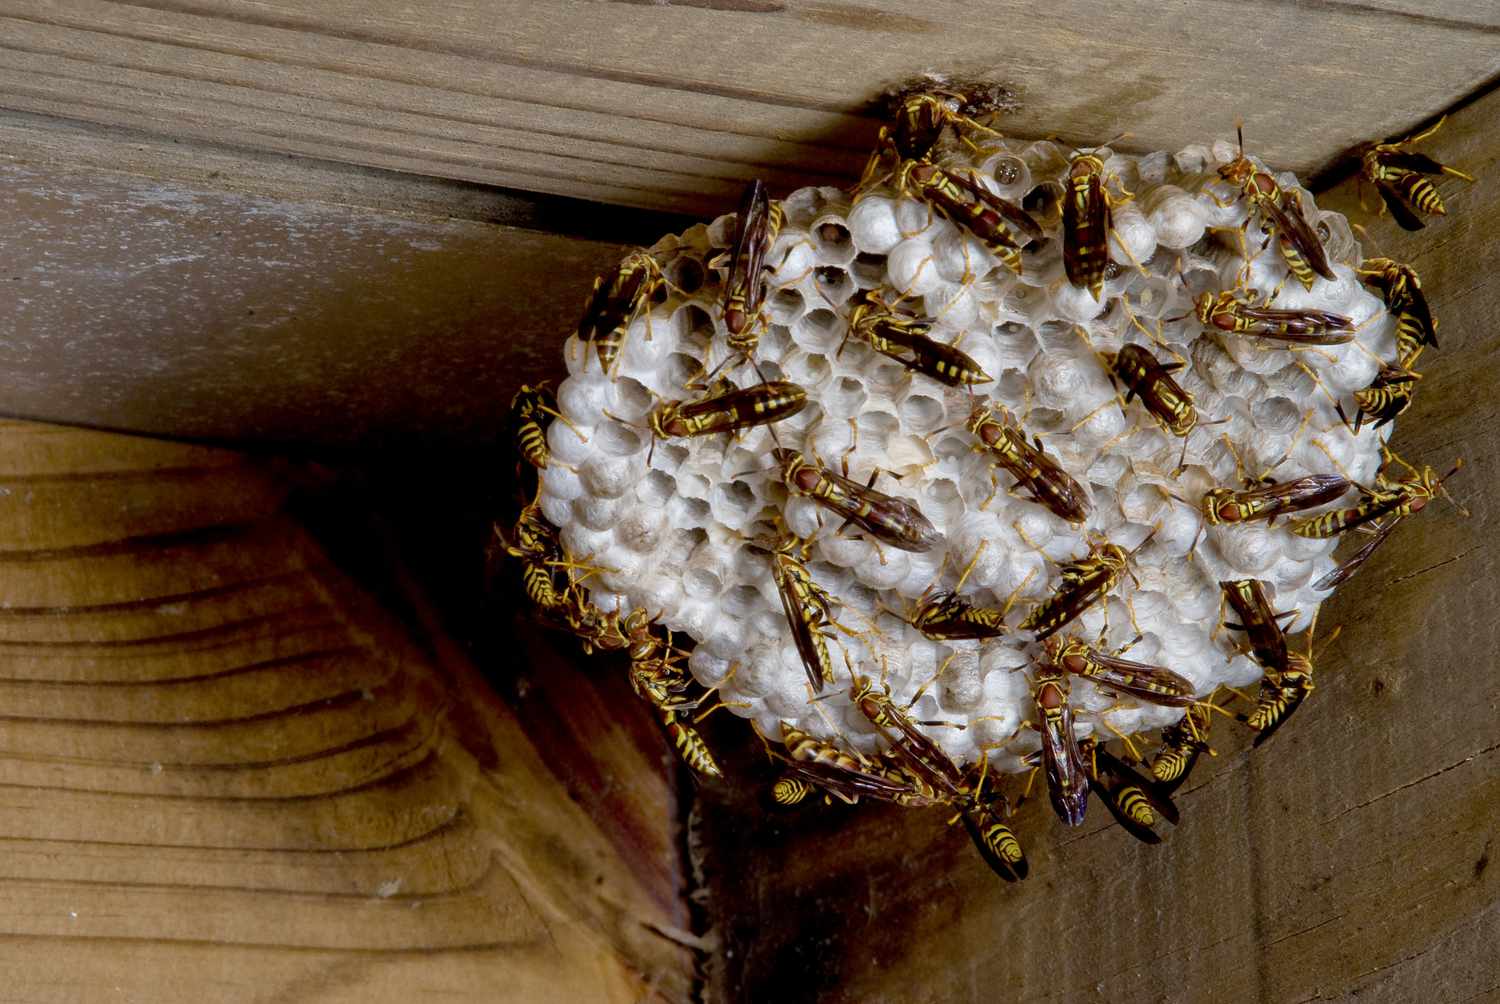 How Many Yellow Jackets In A Nest